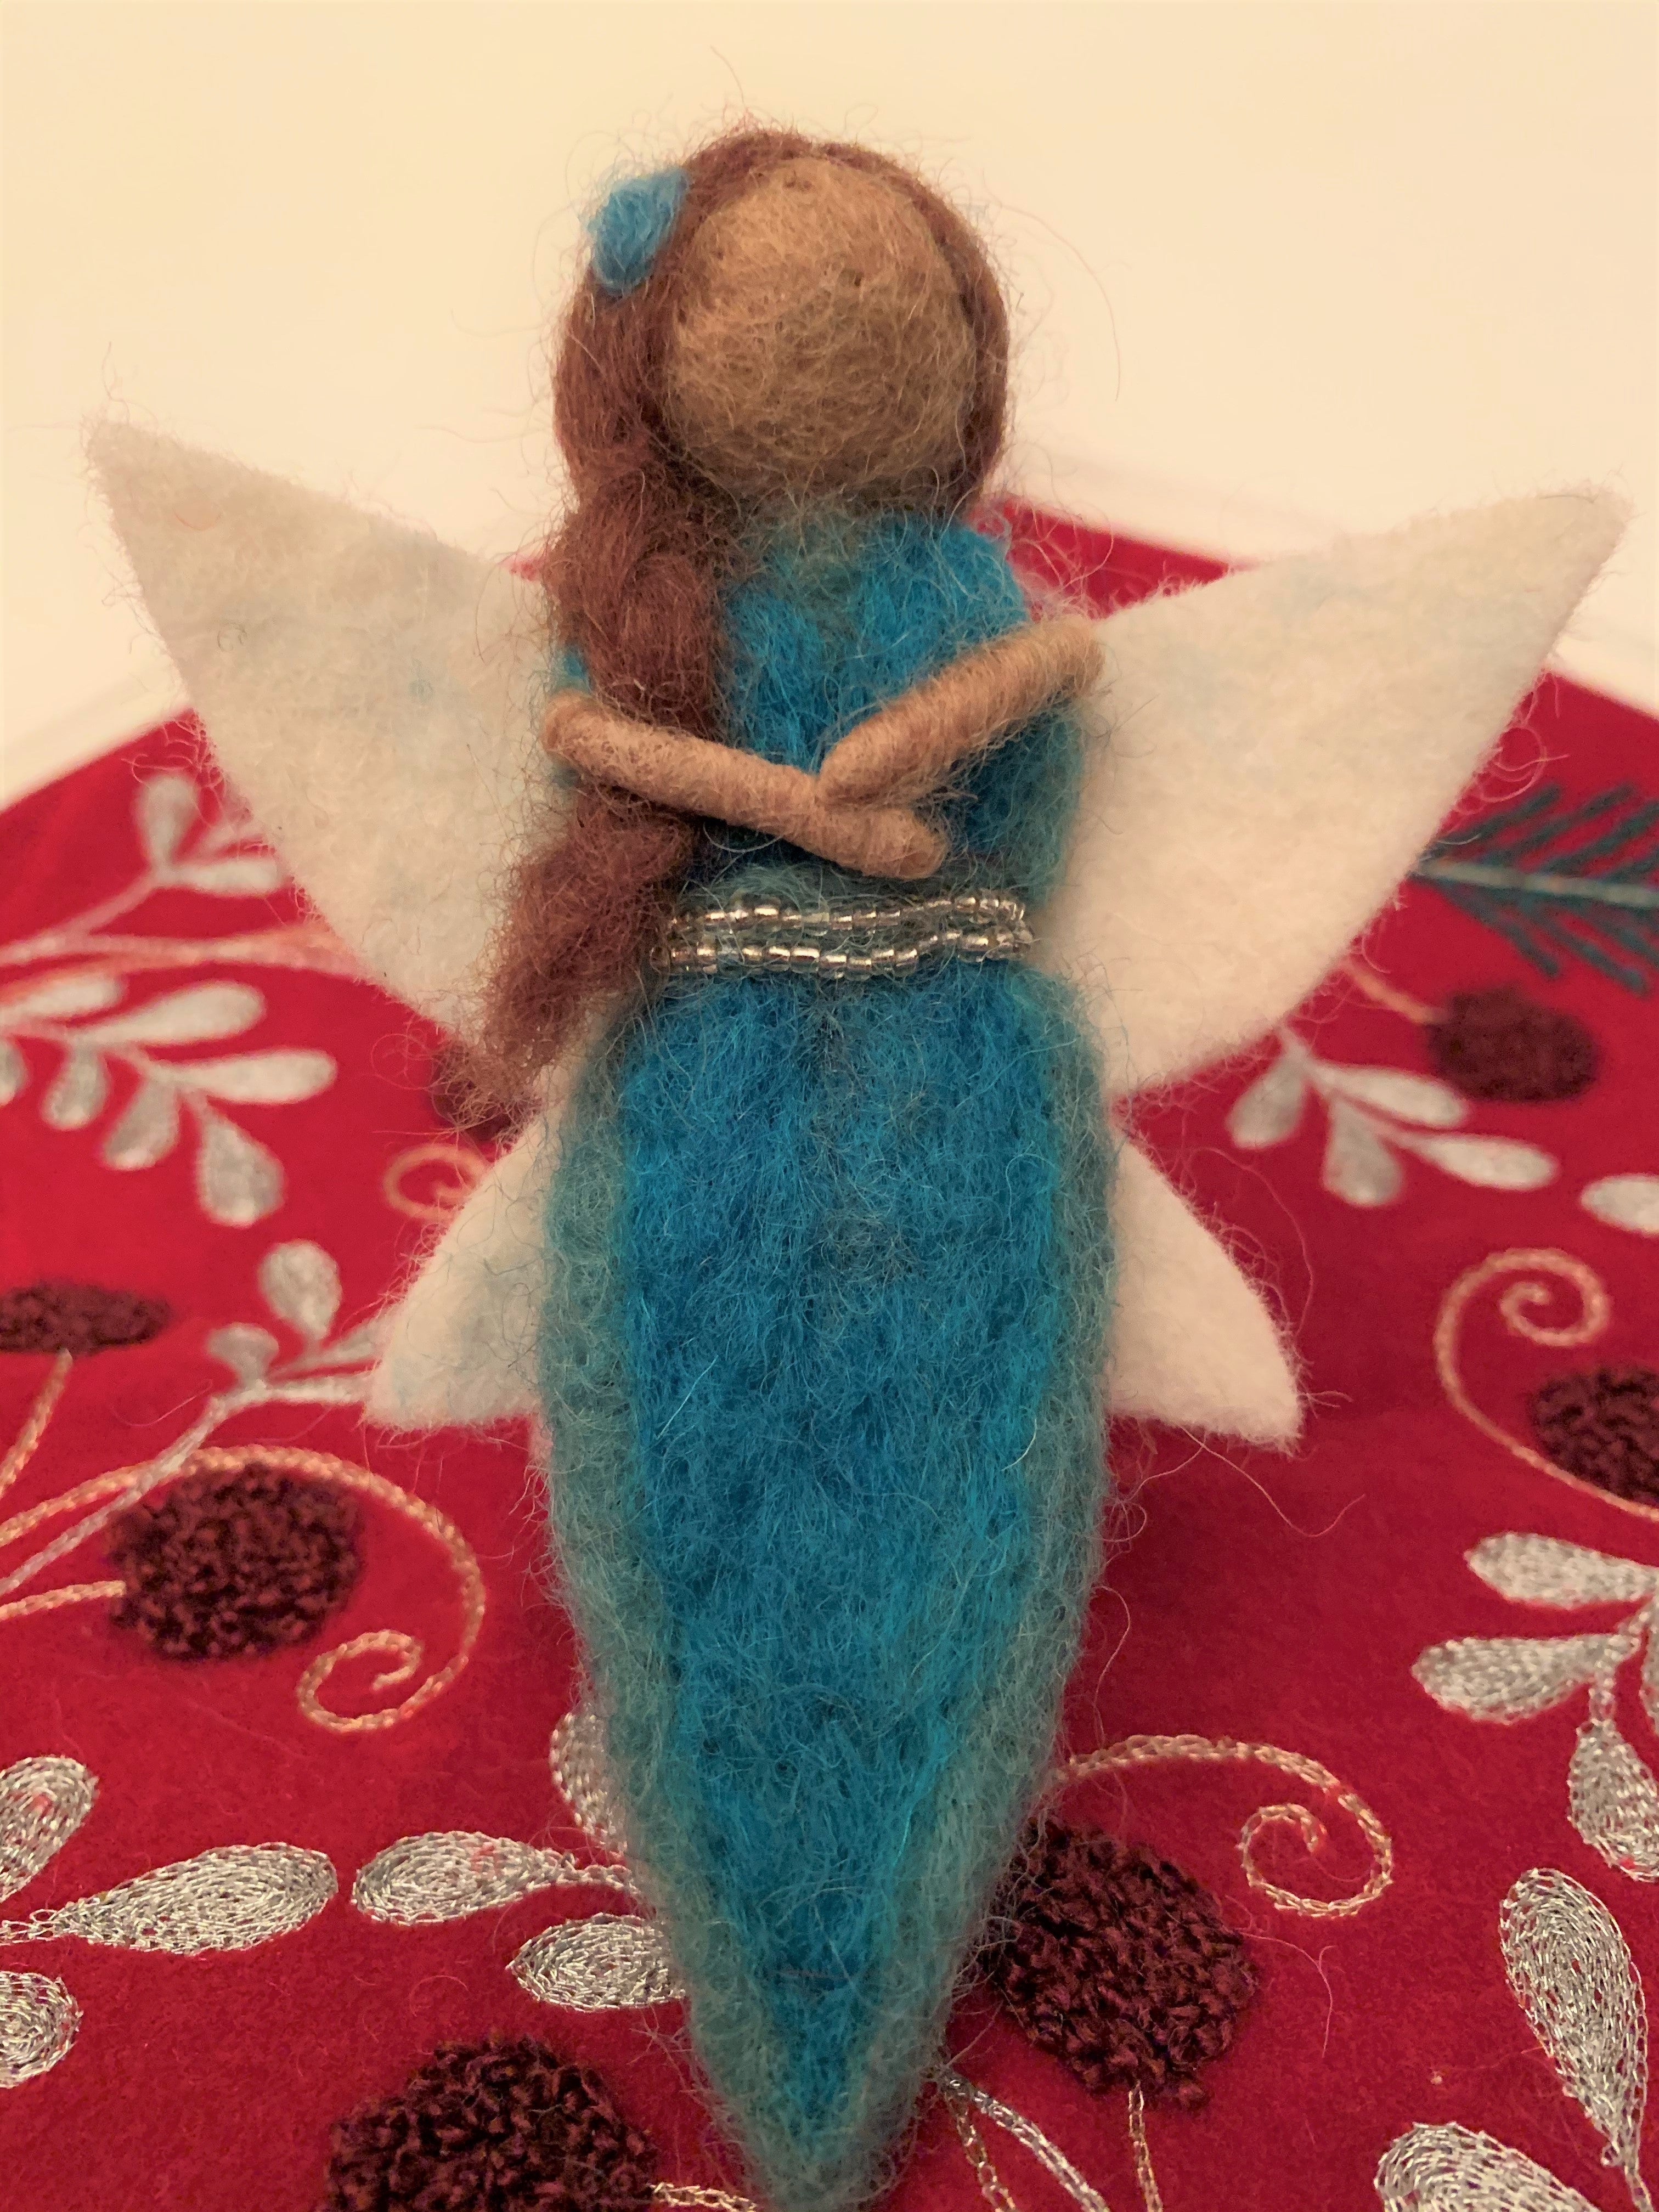 Close-up view. This sweet water-fairy Christmas Ornament wants to bring a little magic into your life. She is... ♥Handmade ♥Fair Trade (artisans who create these ornaments are paid fair wages for their work). ♥Made from 100% natural hand-felted wool ♥Approximately 5"x2.5" ♥One of the 4 fairy "elements" Christmas Ornaments. Buy one or collect them all. ♥Comes with a detachable "fair trade" holiday "to/from" tag to use if you are giving this as a gift. Cost: $11.00